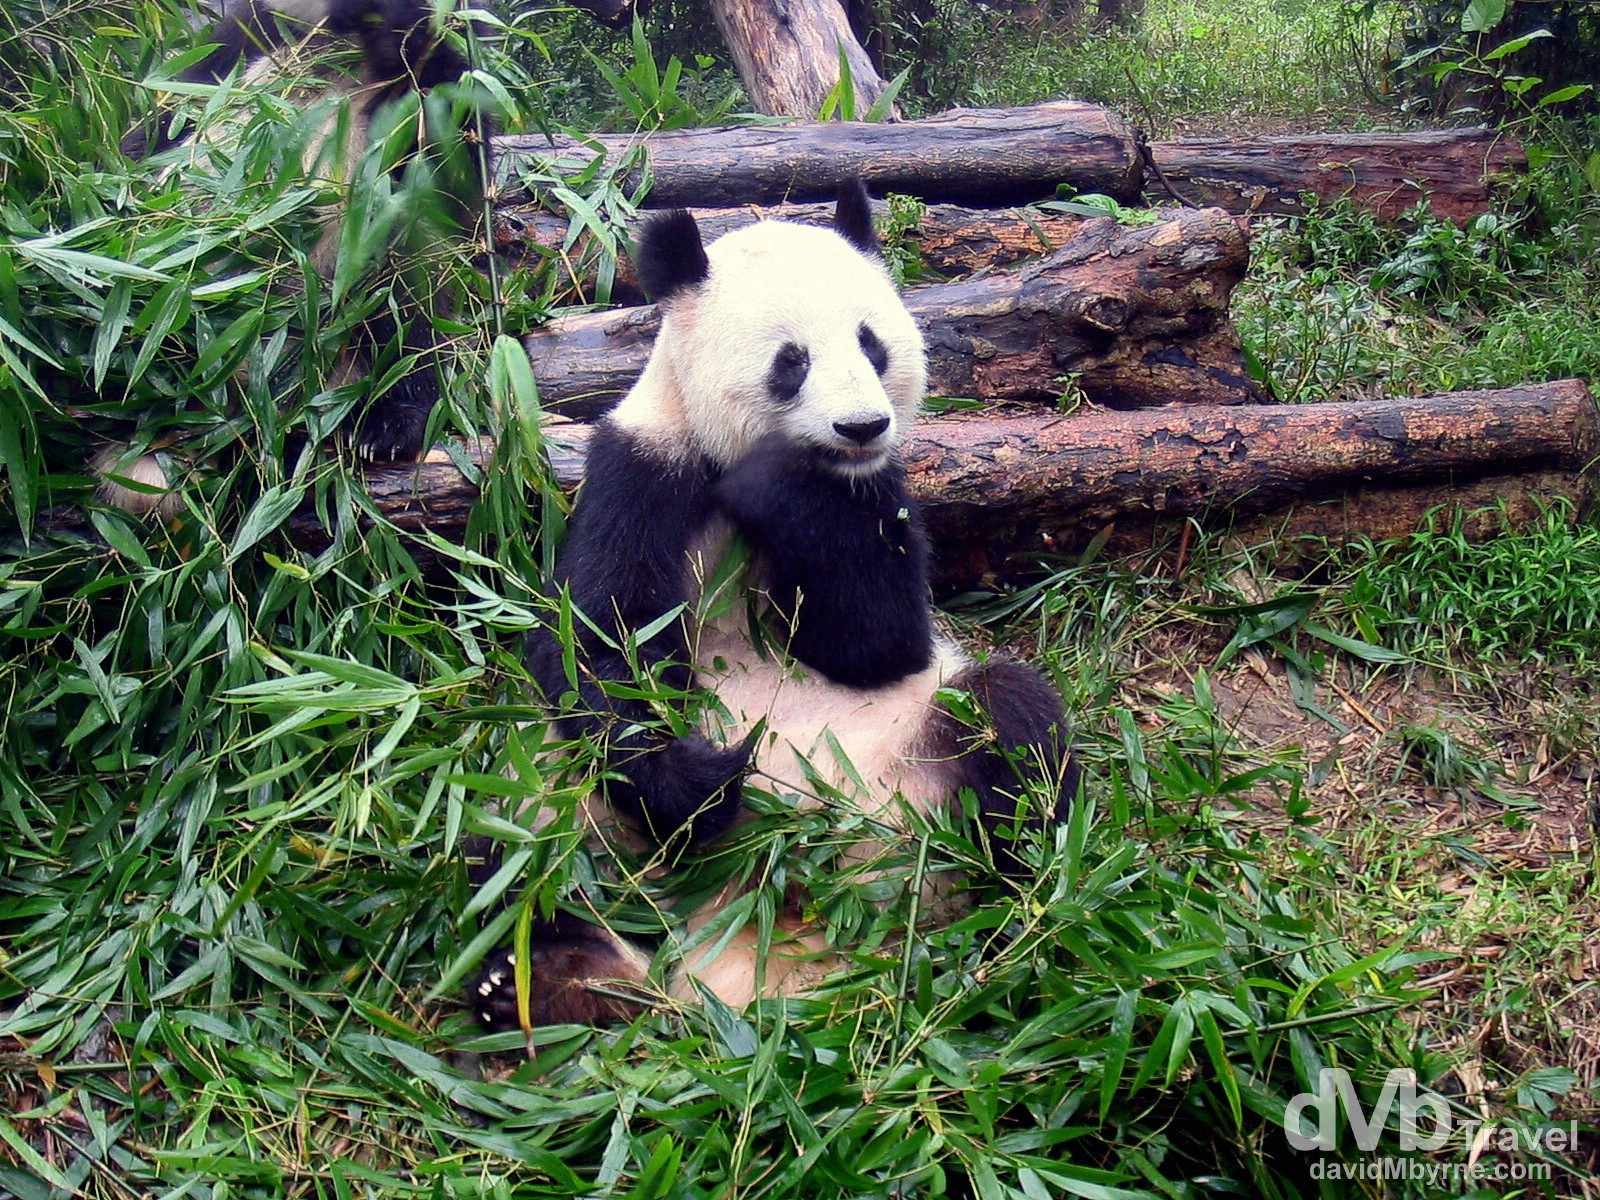 At the Chengdu Research Base of Giant Panda Breeding, Sichuan Province, Central China. September 24th, 2004.